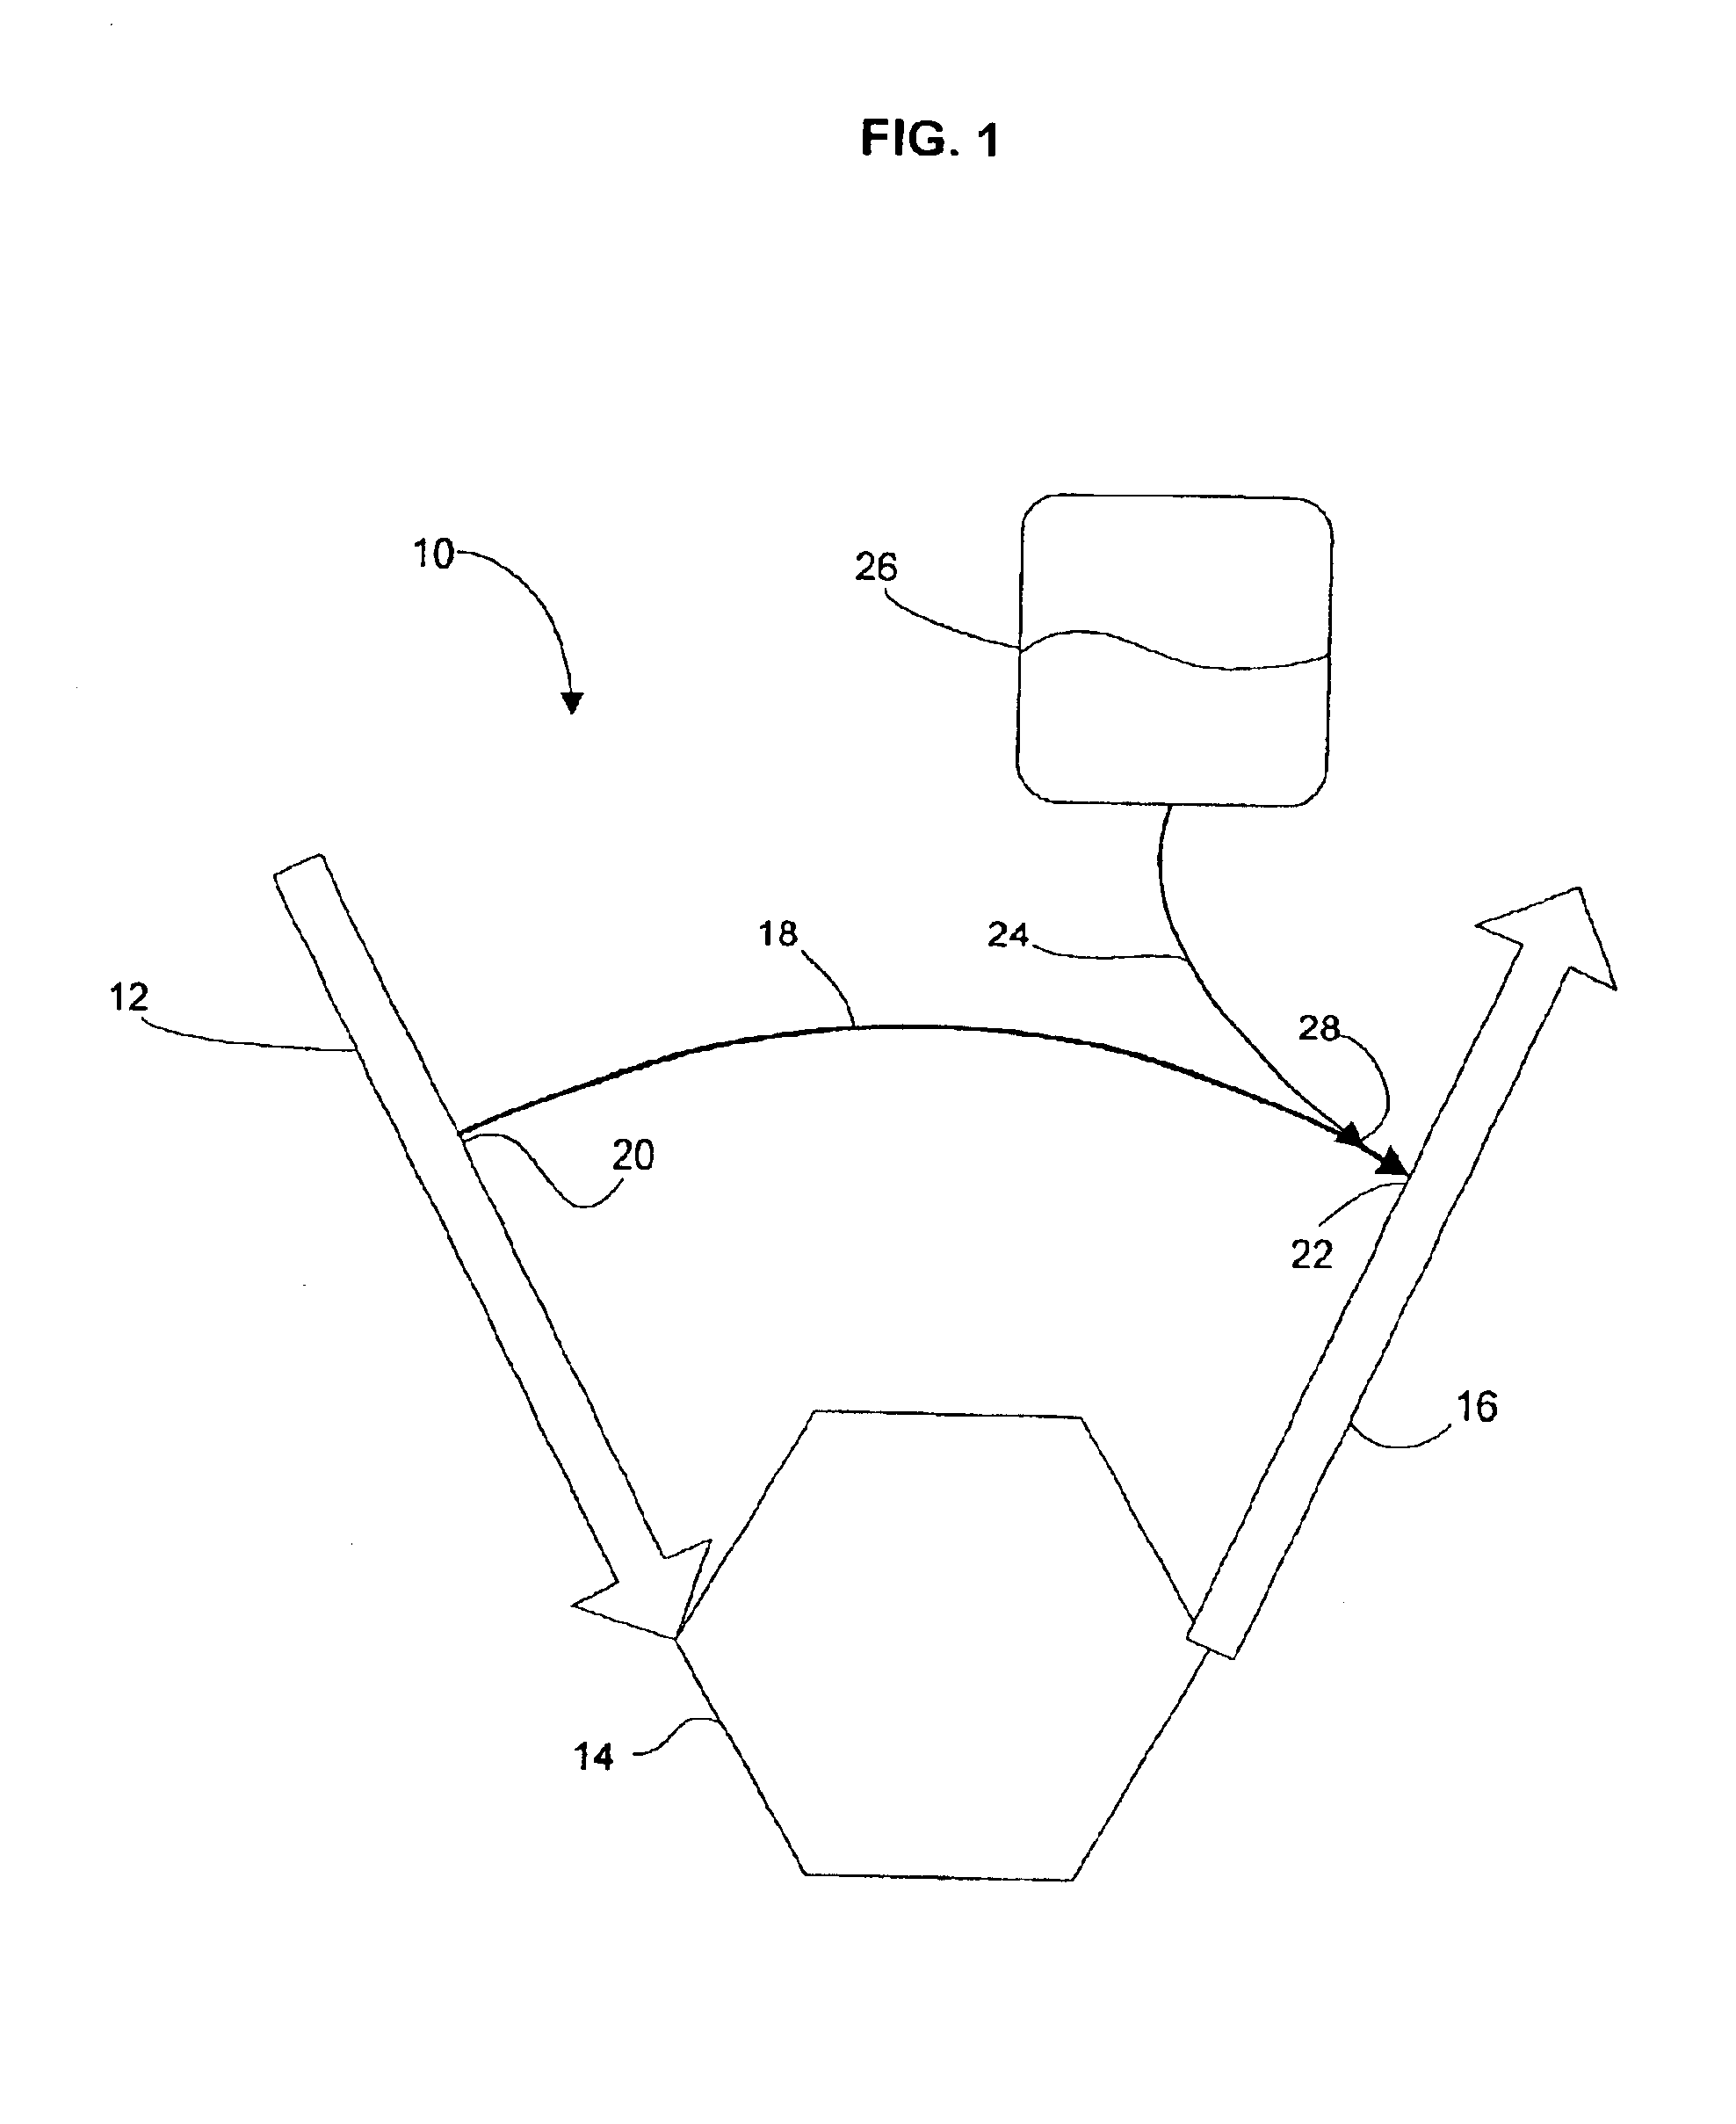 System and method for reducing nitrogen oxides in combustion exhaust streams